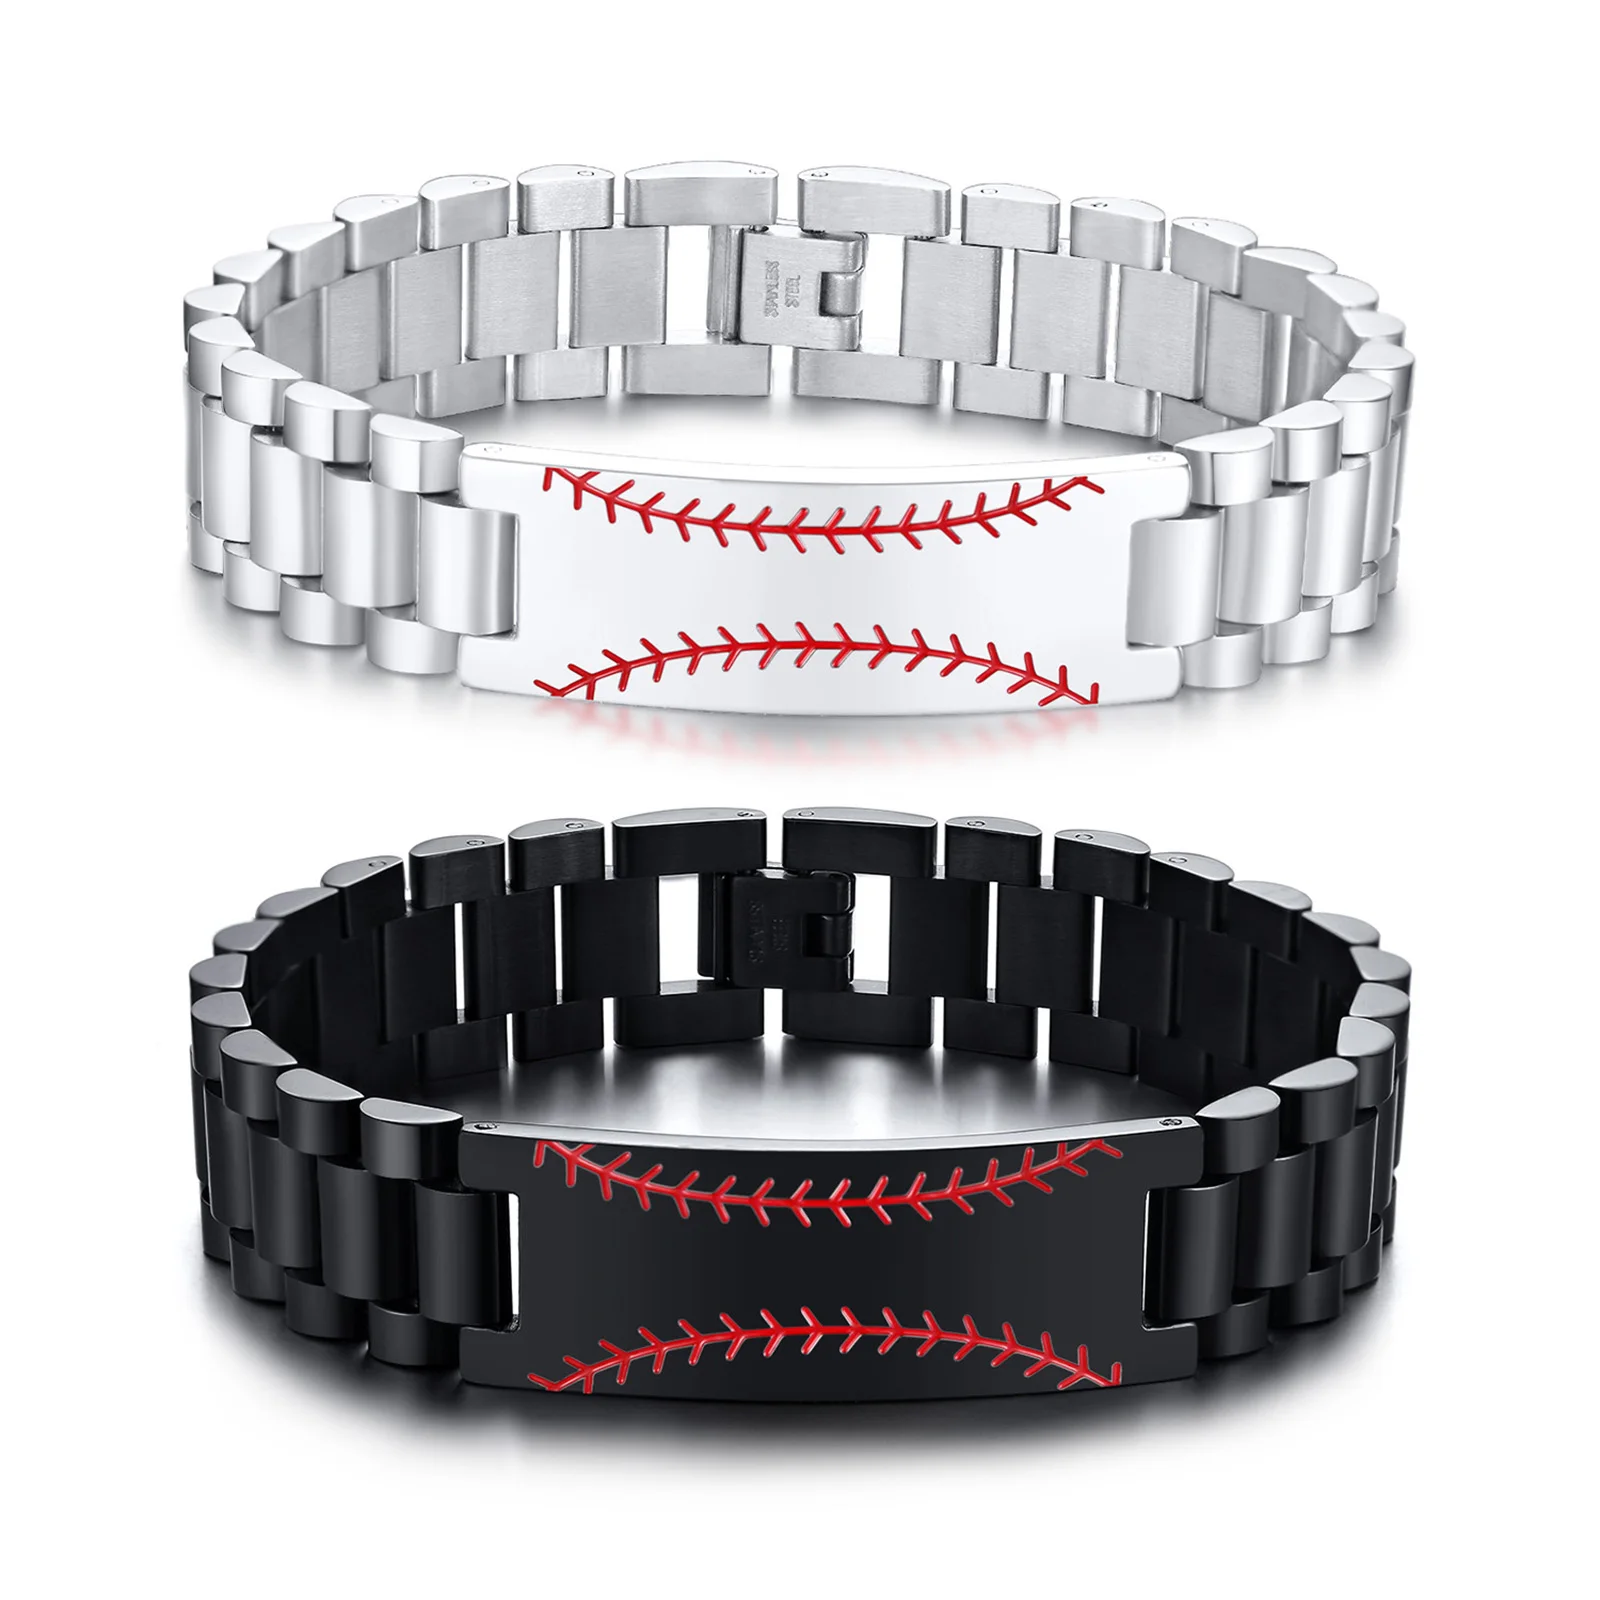 

Men Bracelet,Stainless Steel Wristband,Baseball Watches Band Bracelets for Man Jewelry